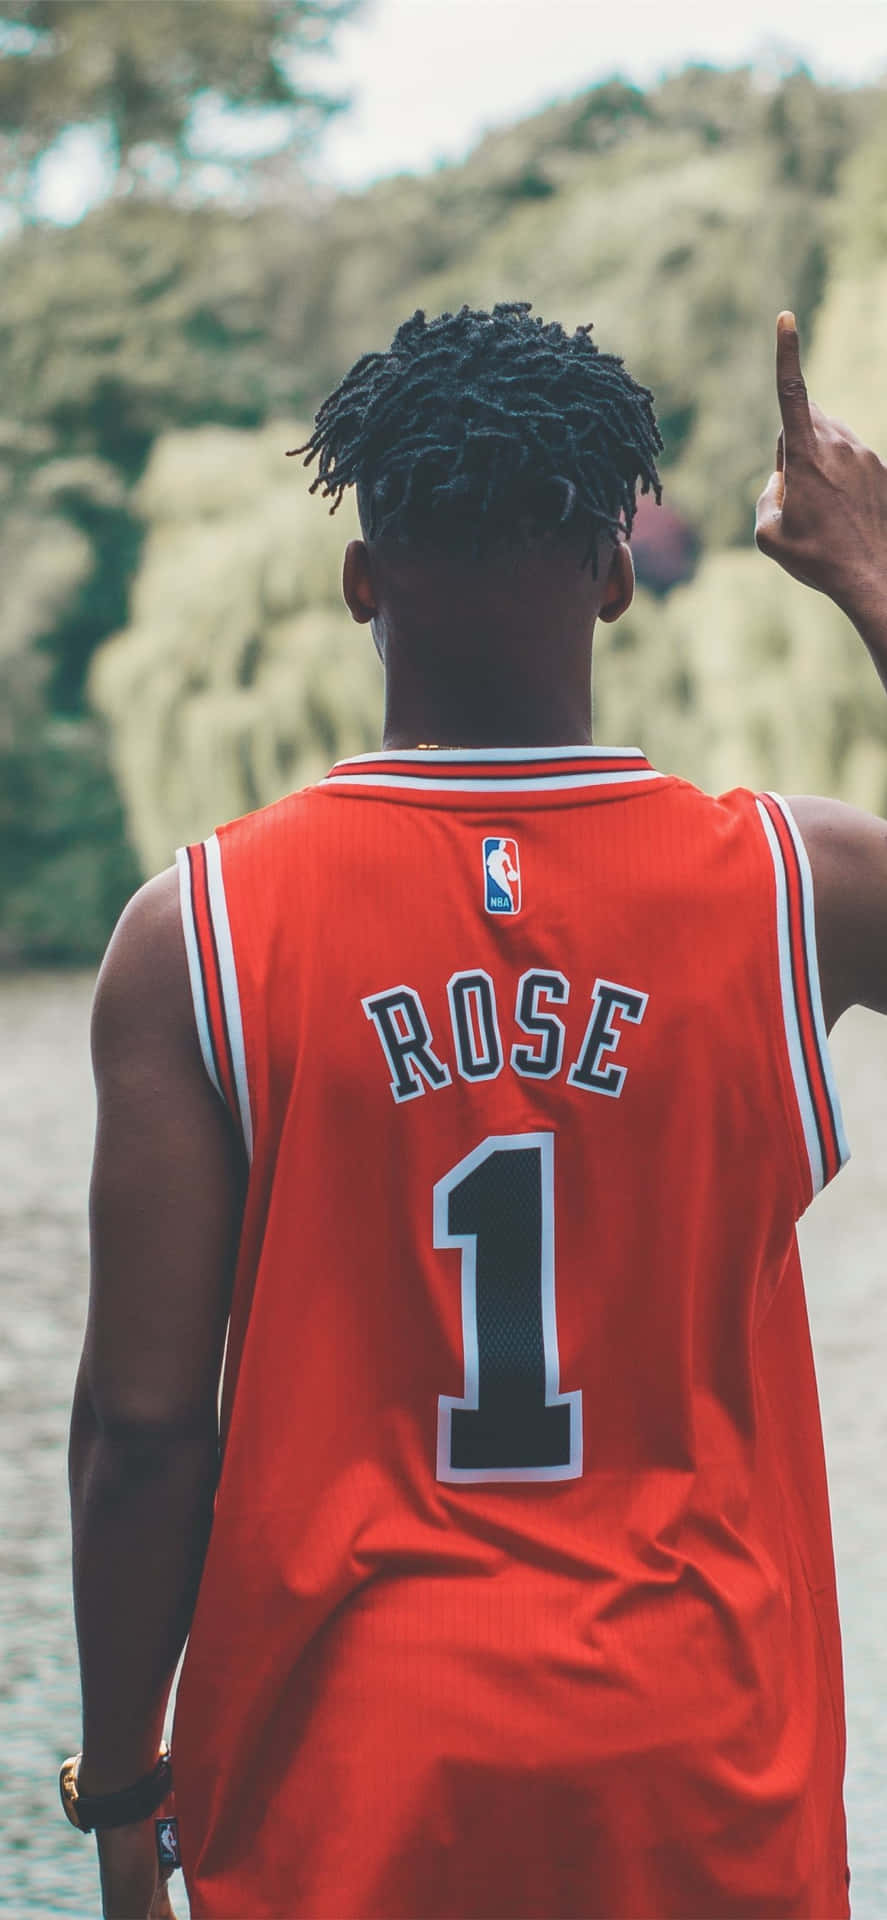 A Man In A Red Jersey Is Pointing To The Water Background